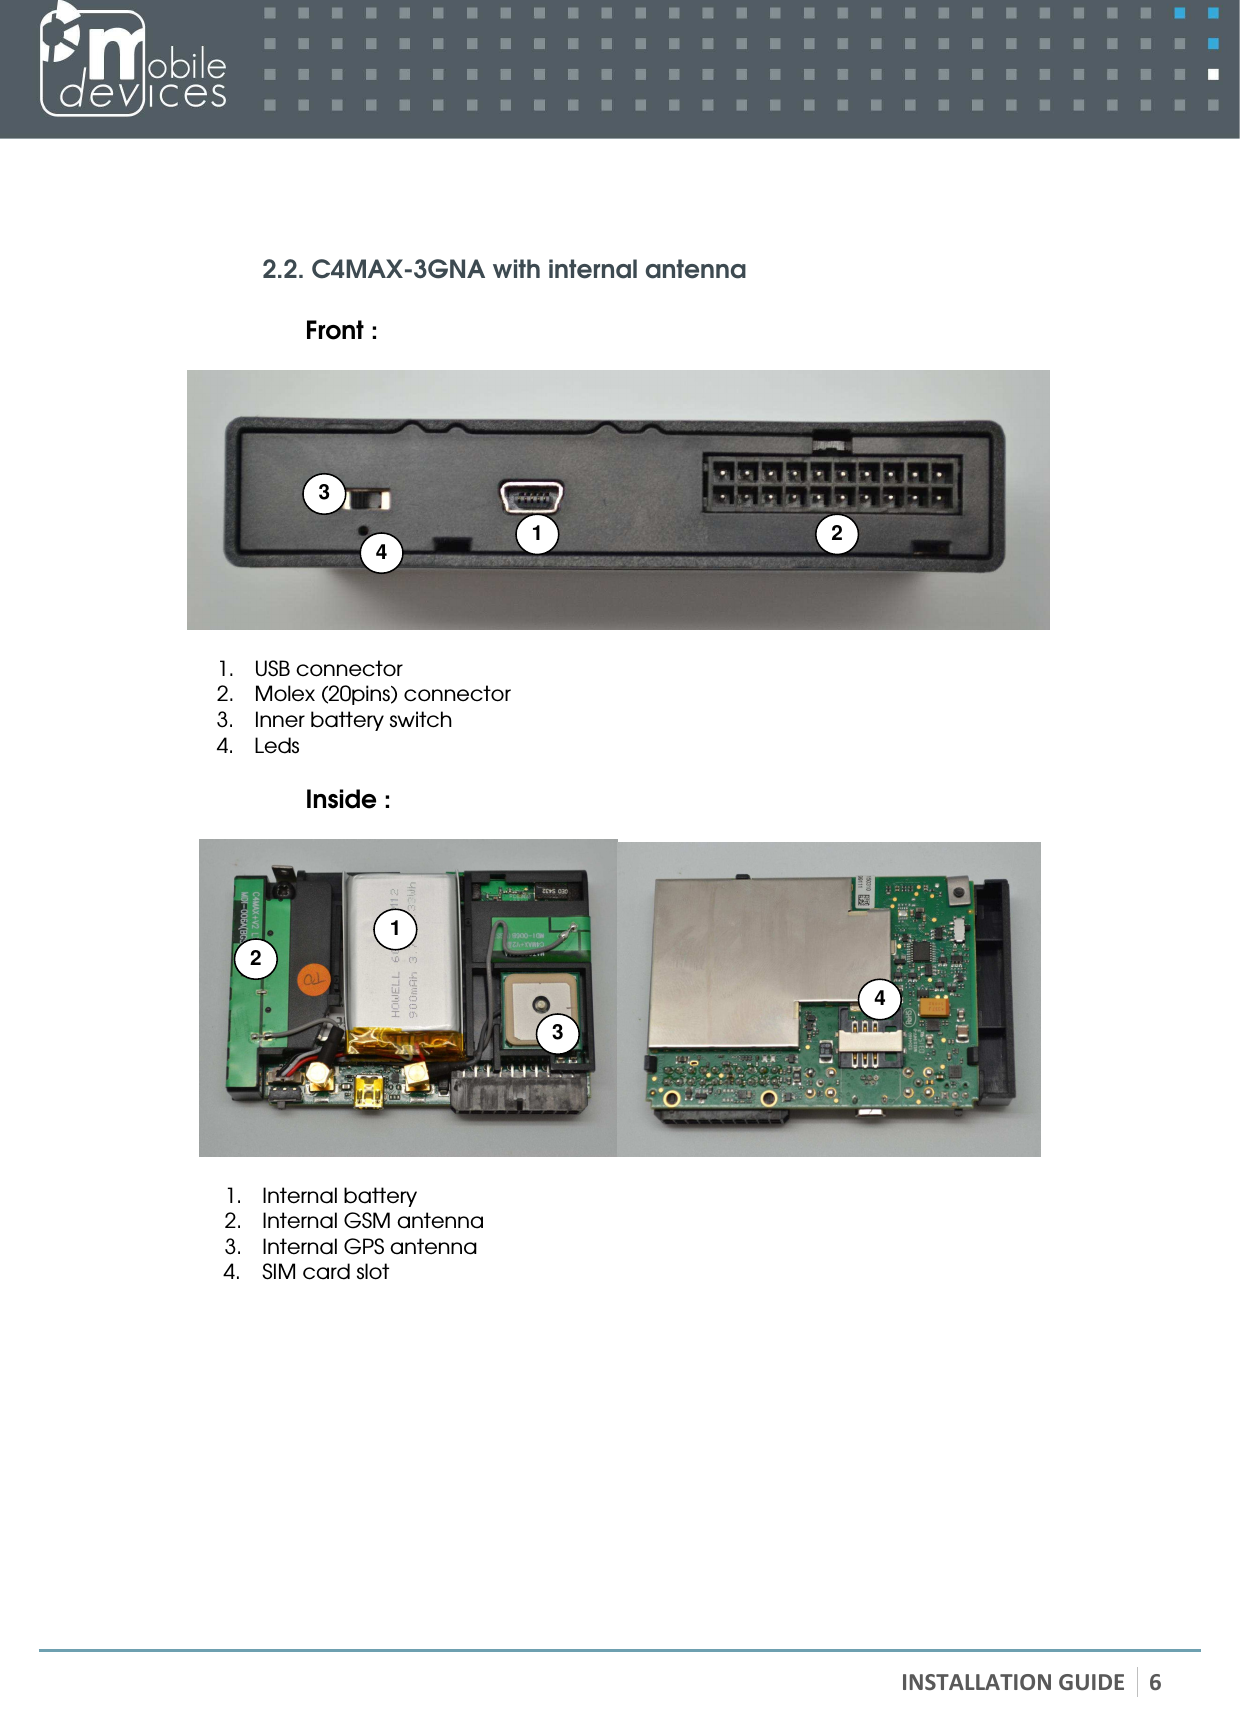   INSTALLATION GUIDE 6     2.2. C4MAX-3GNA with internal antenna  Front :    1. USB connector 2. Molex (20pins) connector 3. Inner battery switch 4. Leds  Inside :    1. Internal battery 2. Internal GSM antenna 3. Internal GPS antenna 4. SIM card slot  1 2 3  4 1 2 3  4 